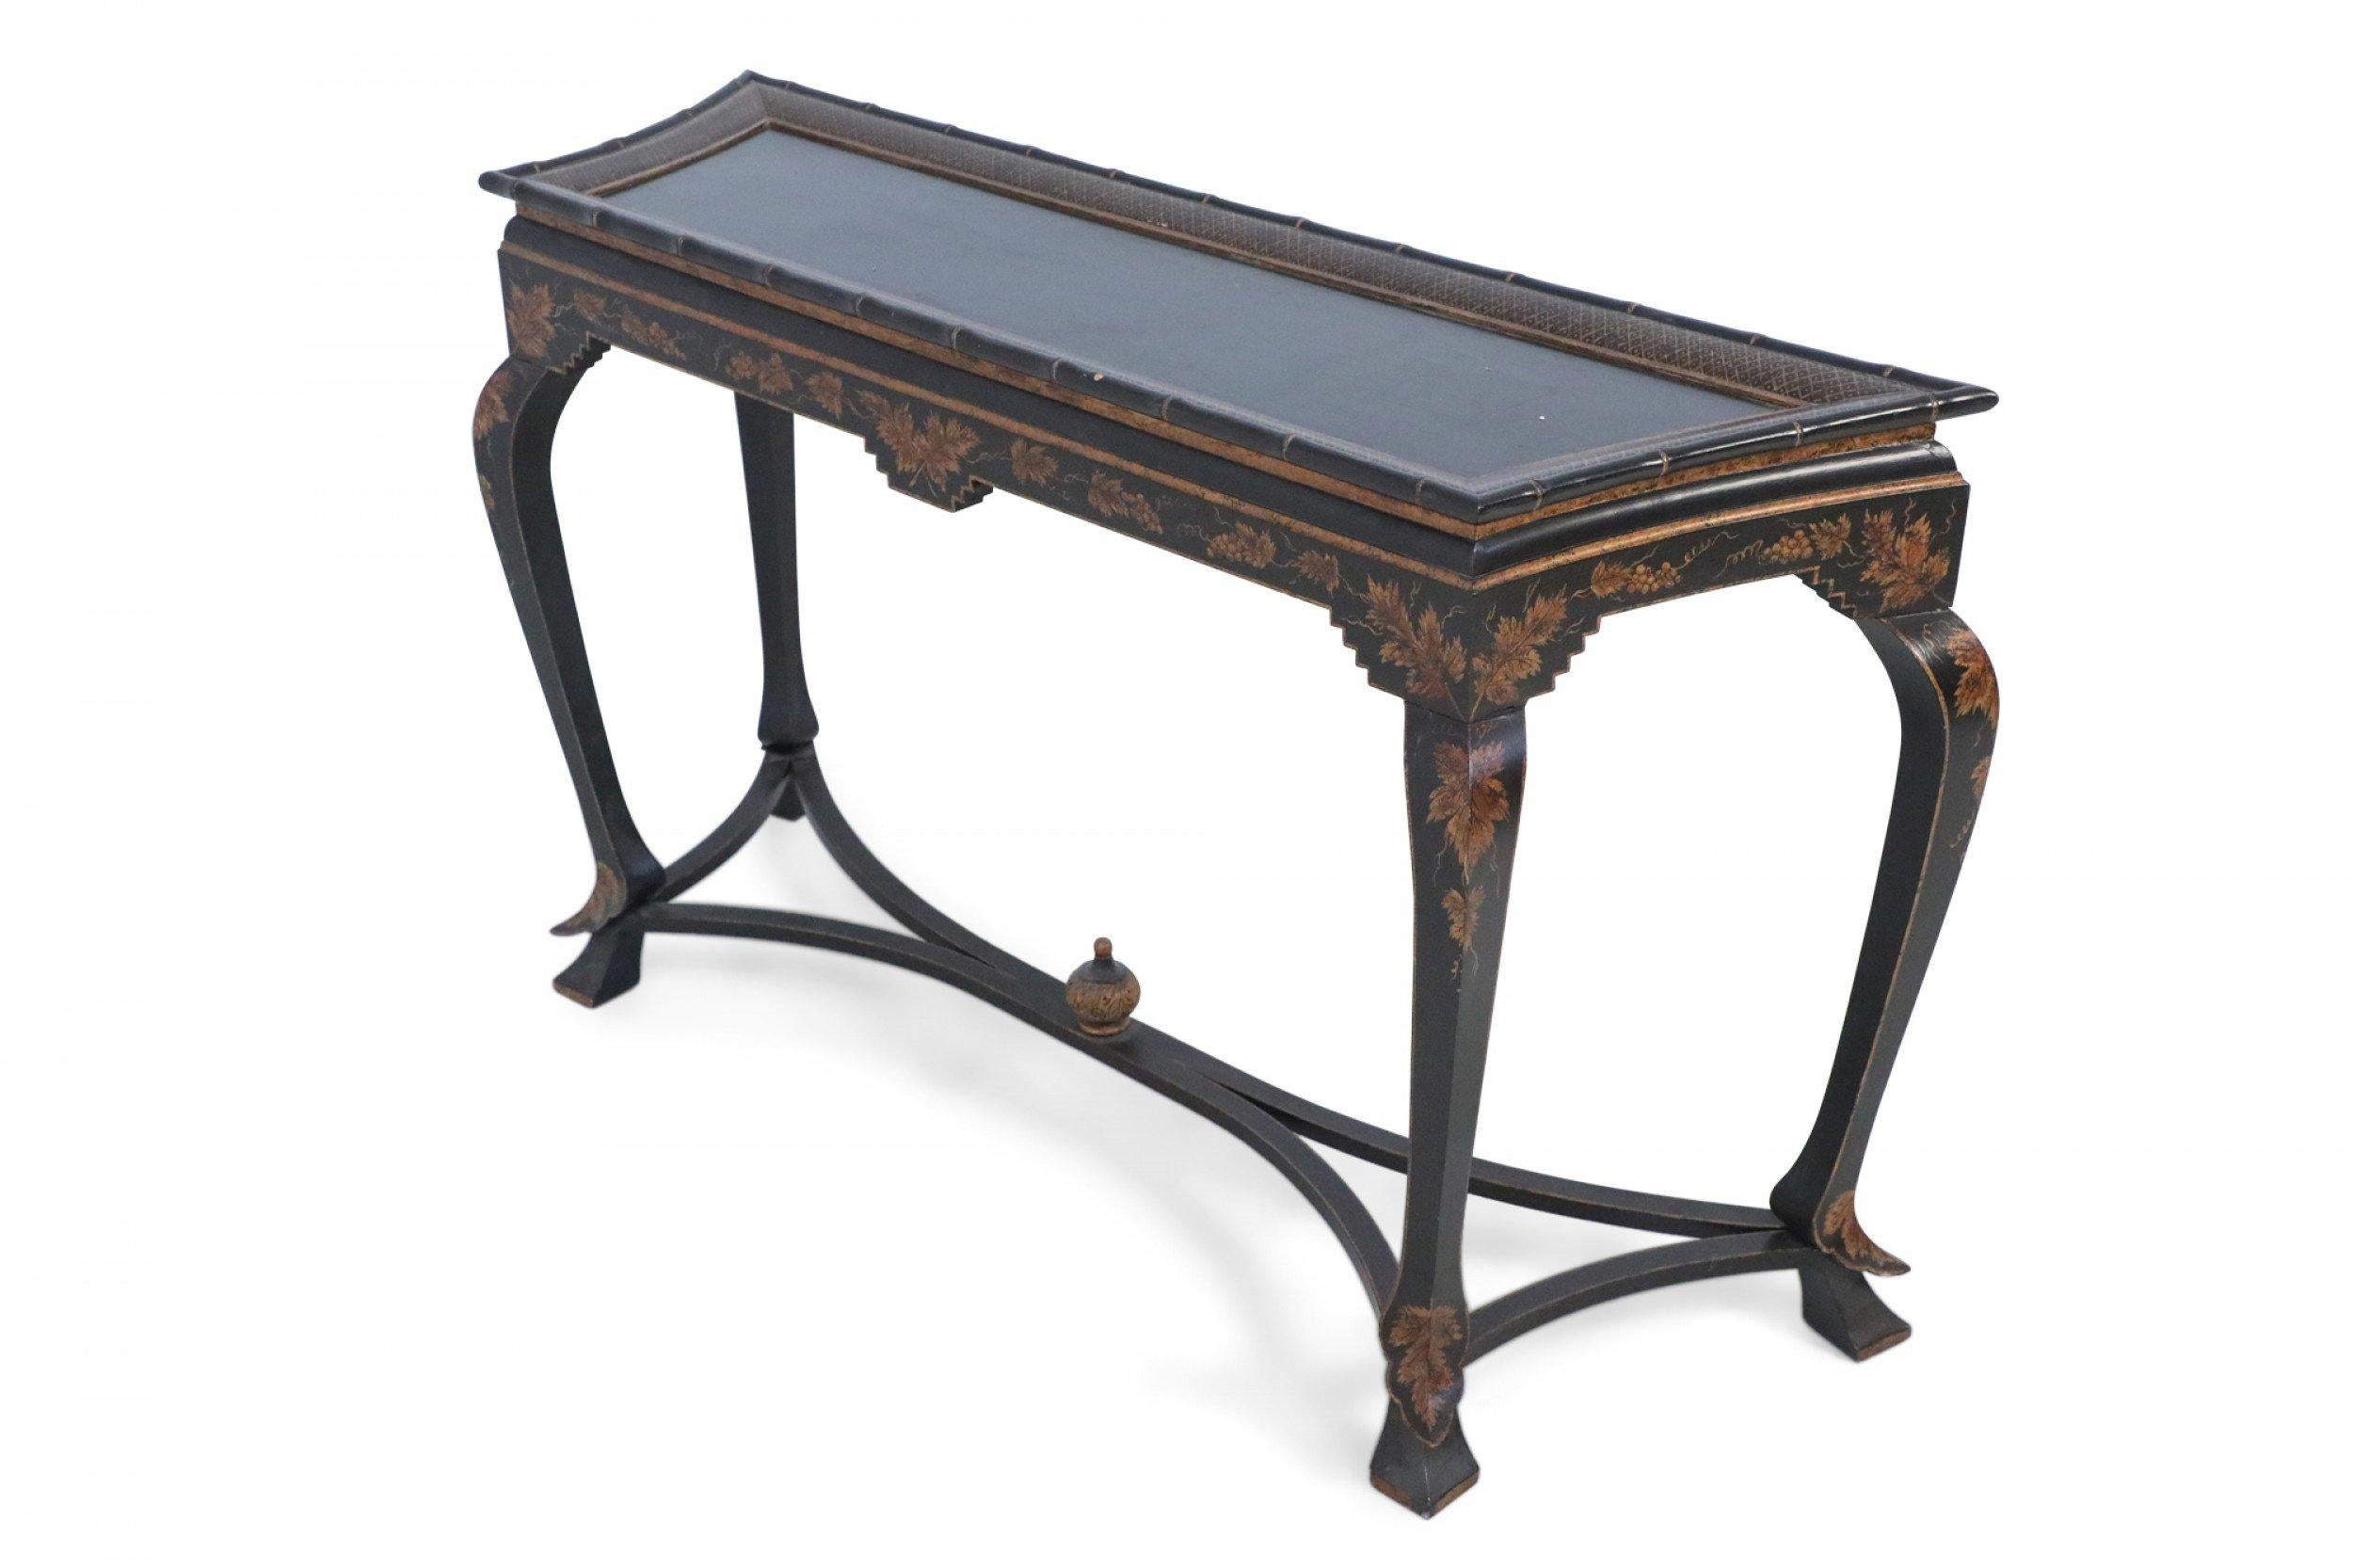 Chinese black painted console table topped with faux bamboo trim, a trapezoidal shaped top framed in a gold lattice pattern, over an apron decorated in gold grape leaves, supported by cabriole legs connected with a stretcher that intersects at a